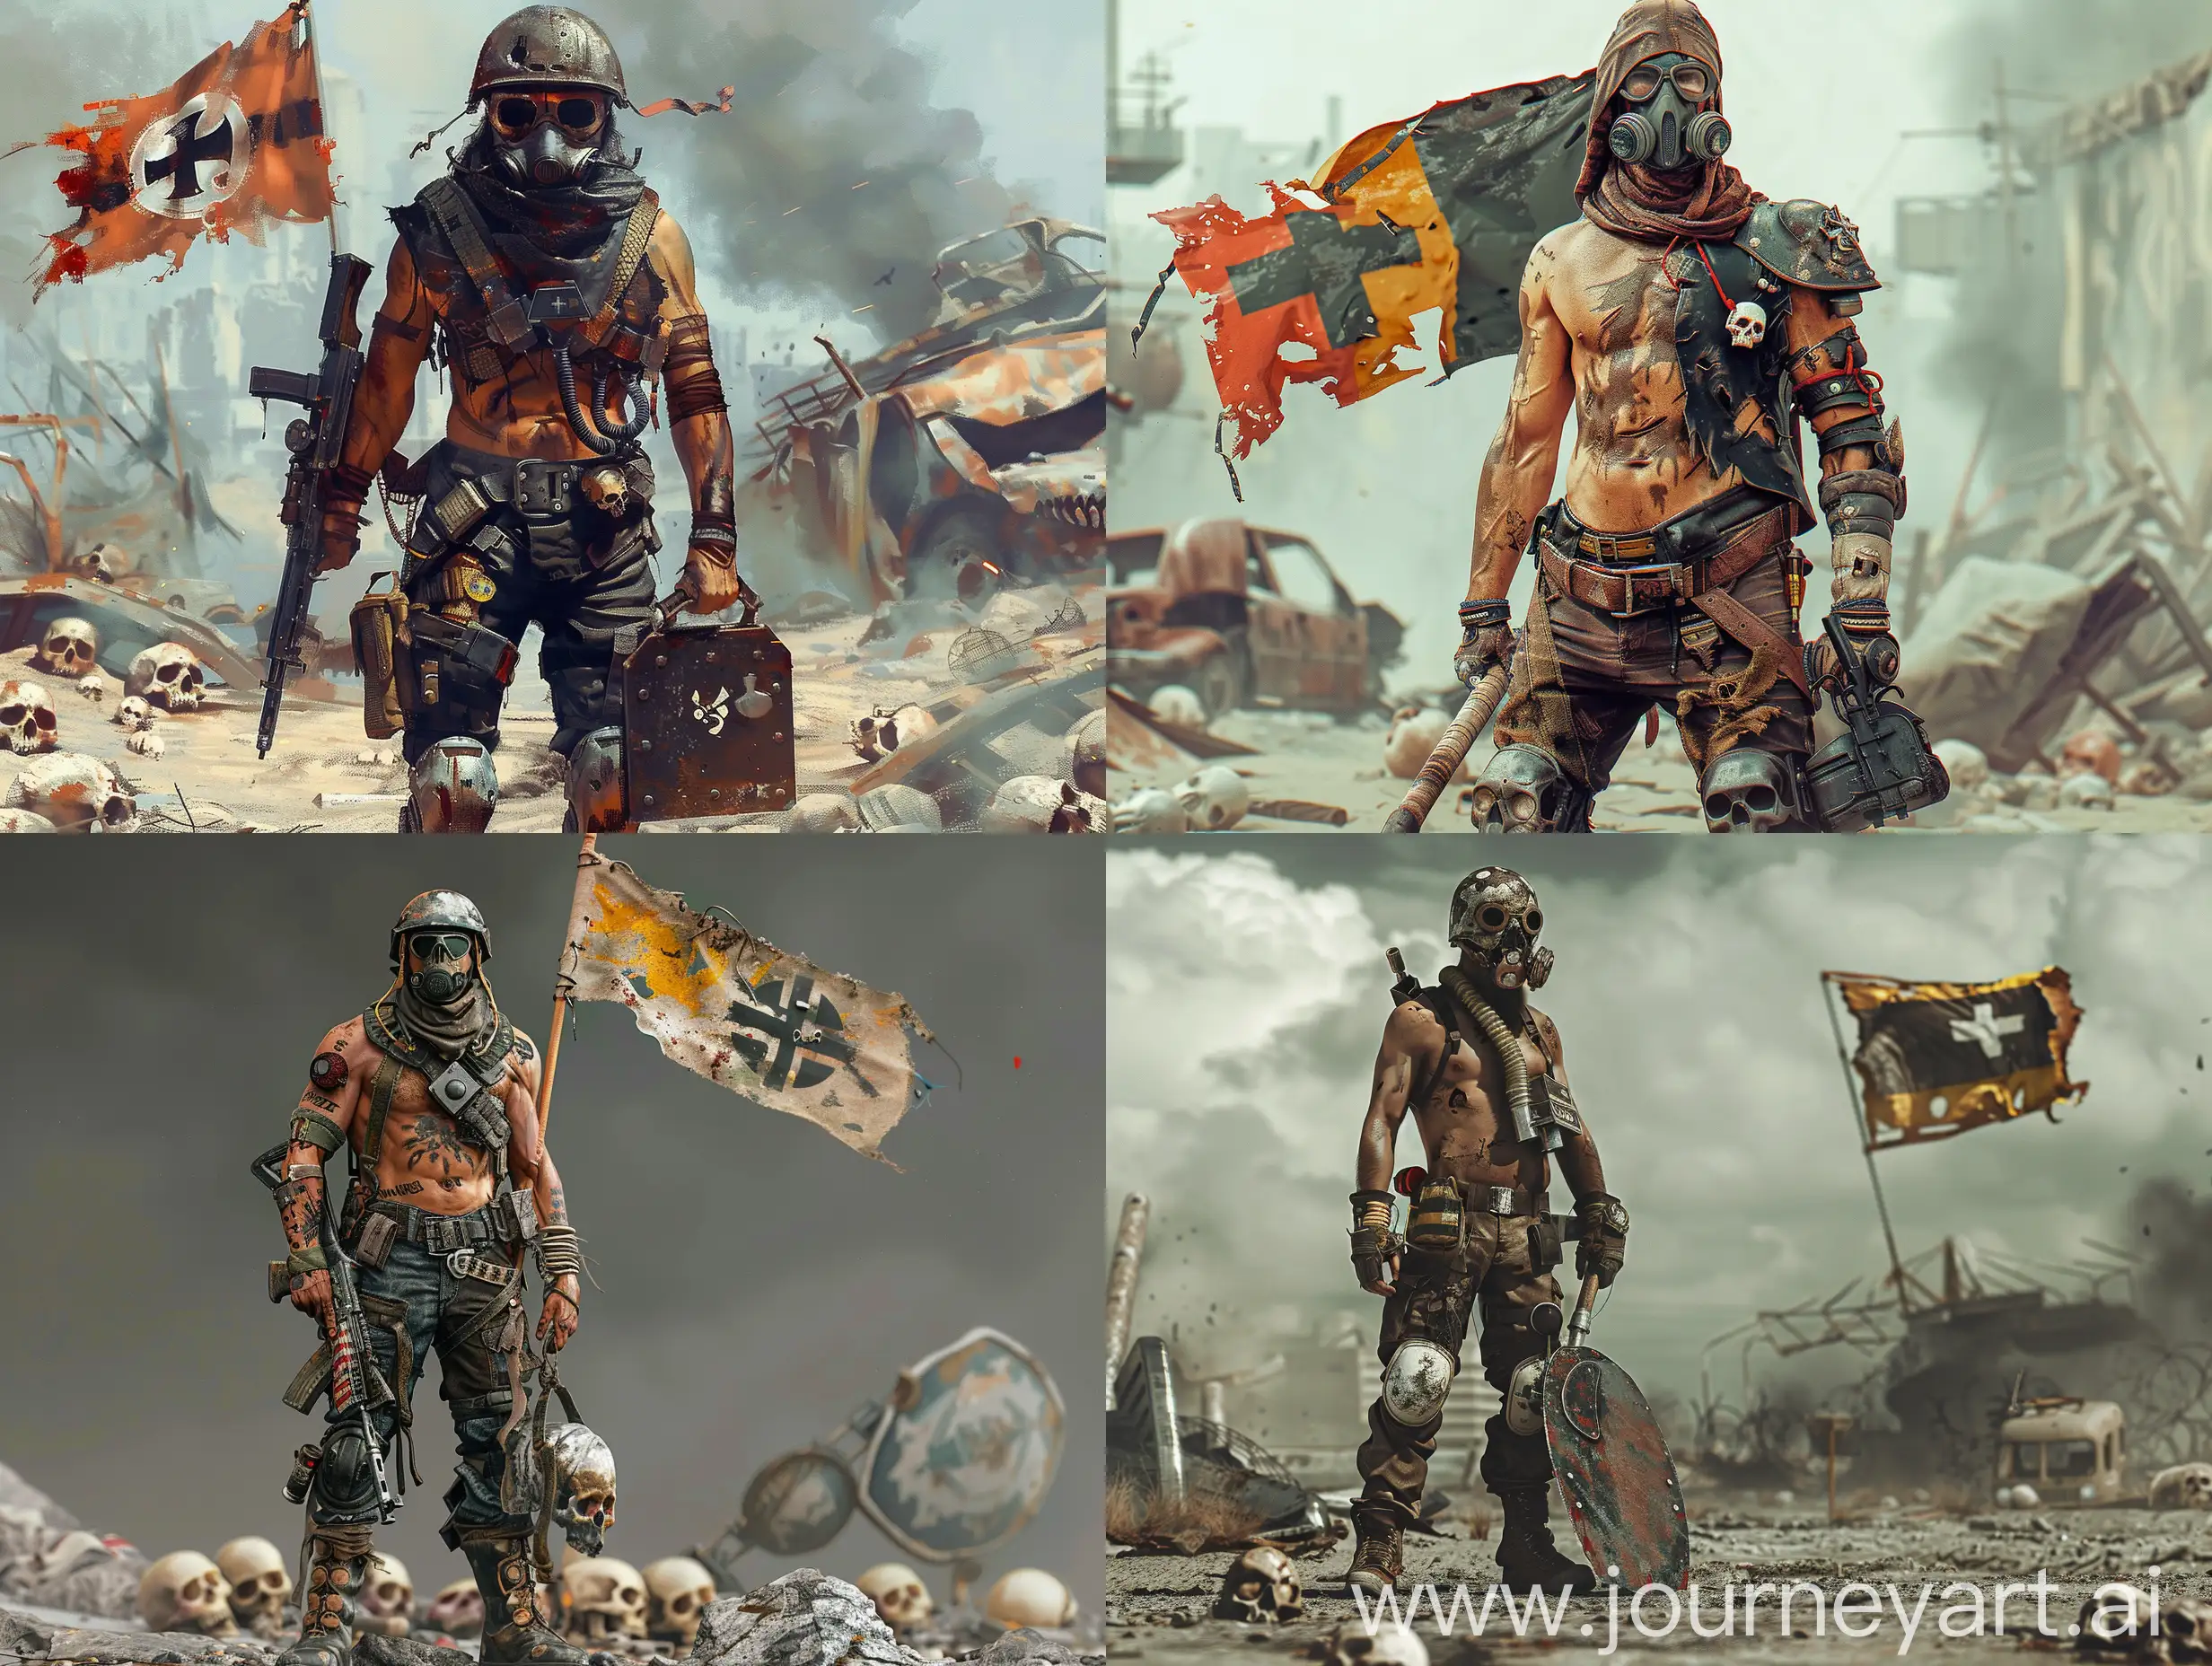 PostApocalyptic-Fighter-with-Skull-Flag-in-Ruined-Landscape